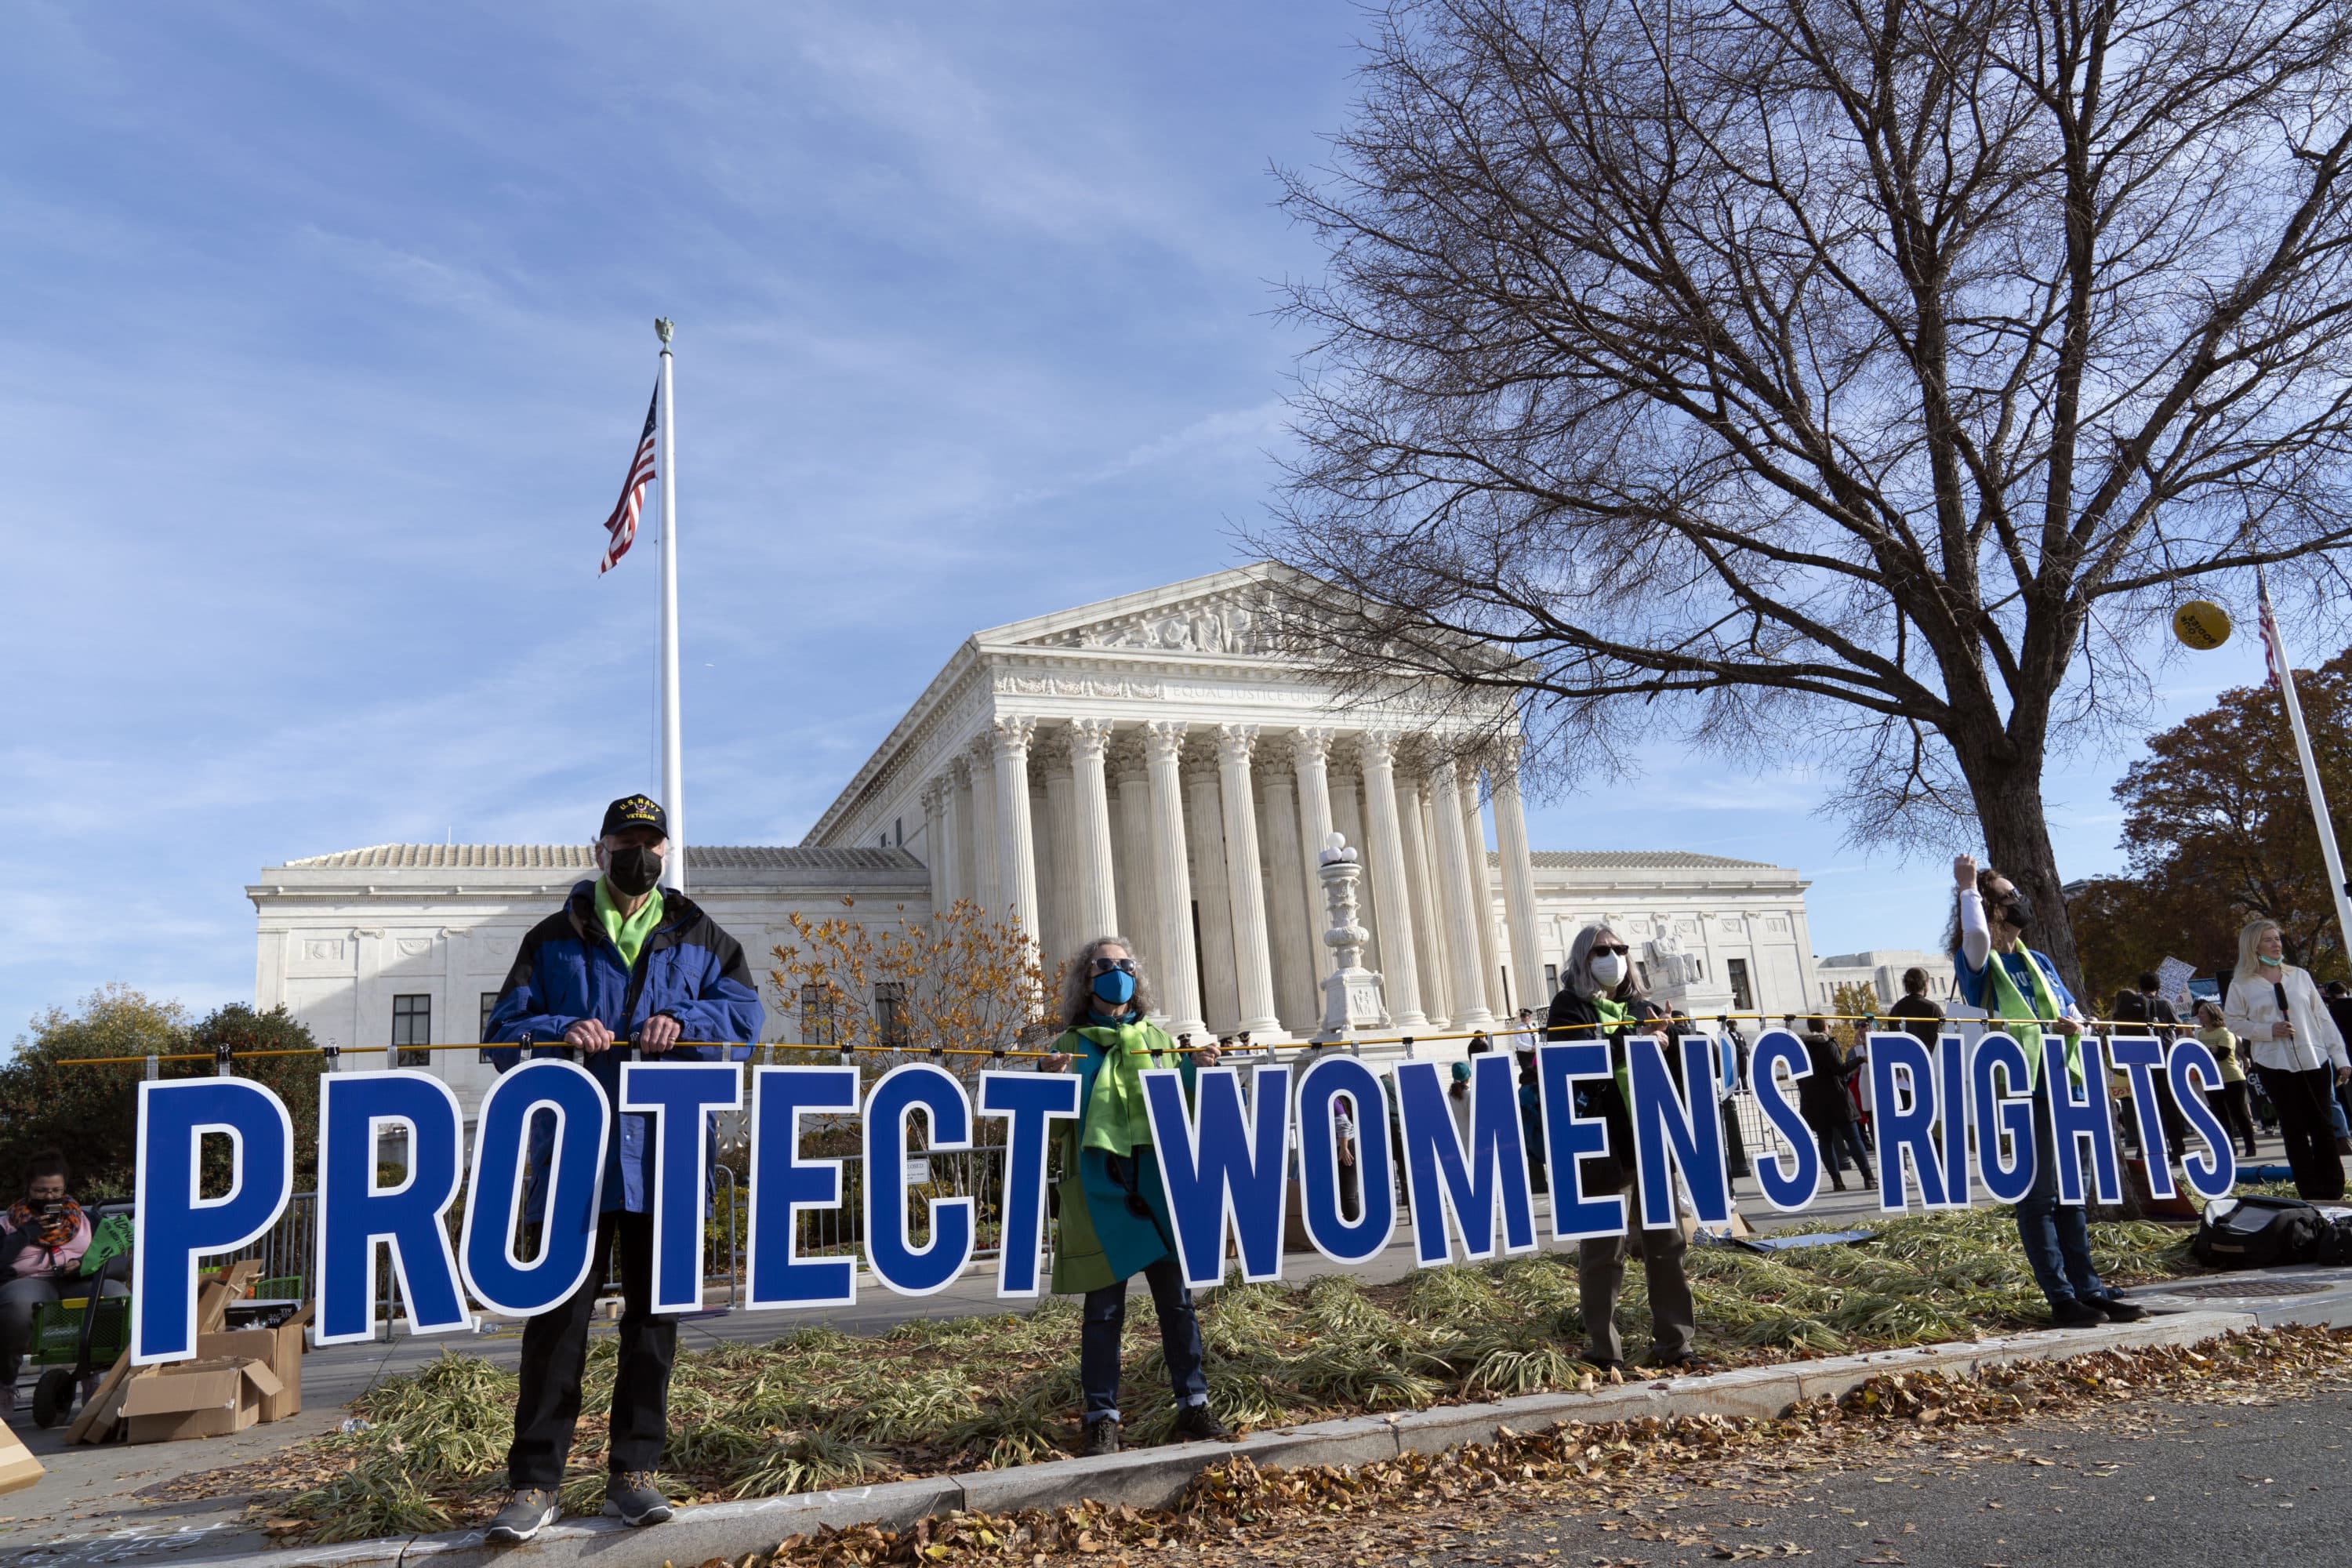 Abortion rights advocates demonstrate in front of the U.S. Supreme Court Wednesday, Dec. 1, 2021, in Washington, as the court hears arguments in a case from Mississippi, where a 2018 law would ban abortions after 15 weeks of pregnancy. (Jose Luis Magana/AP)